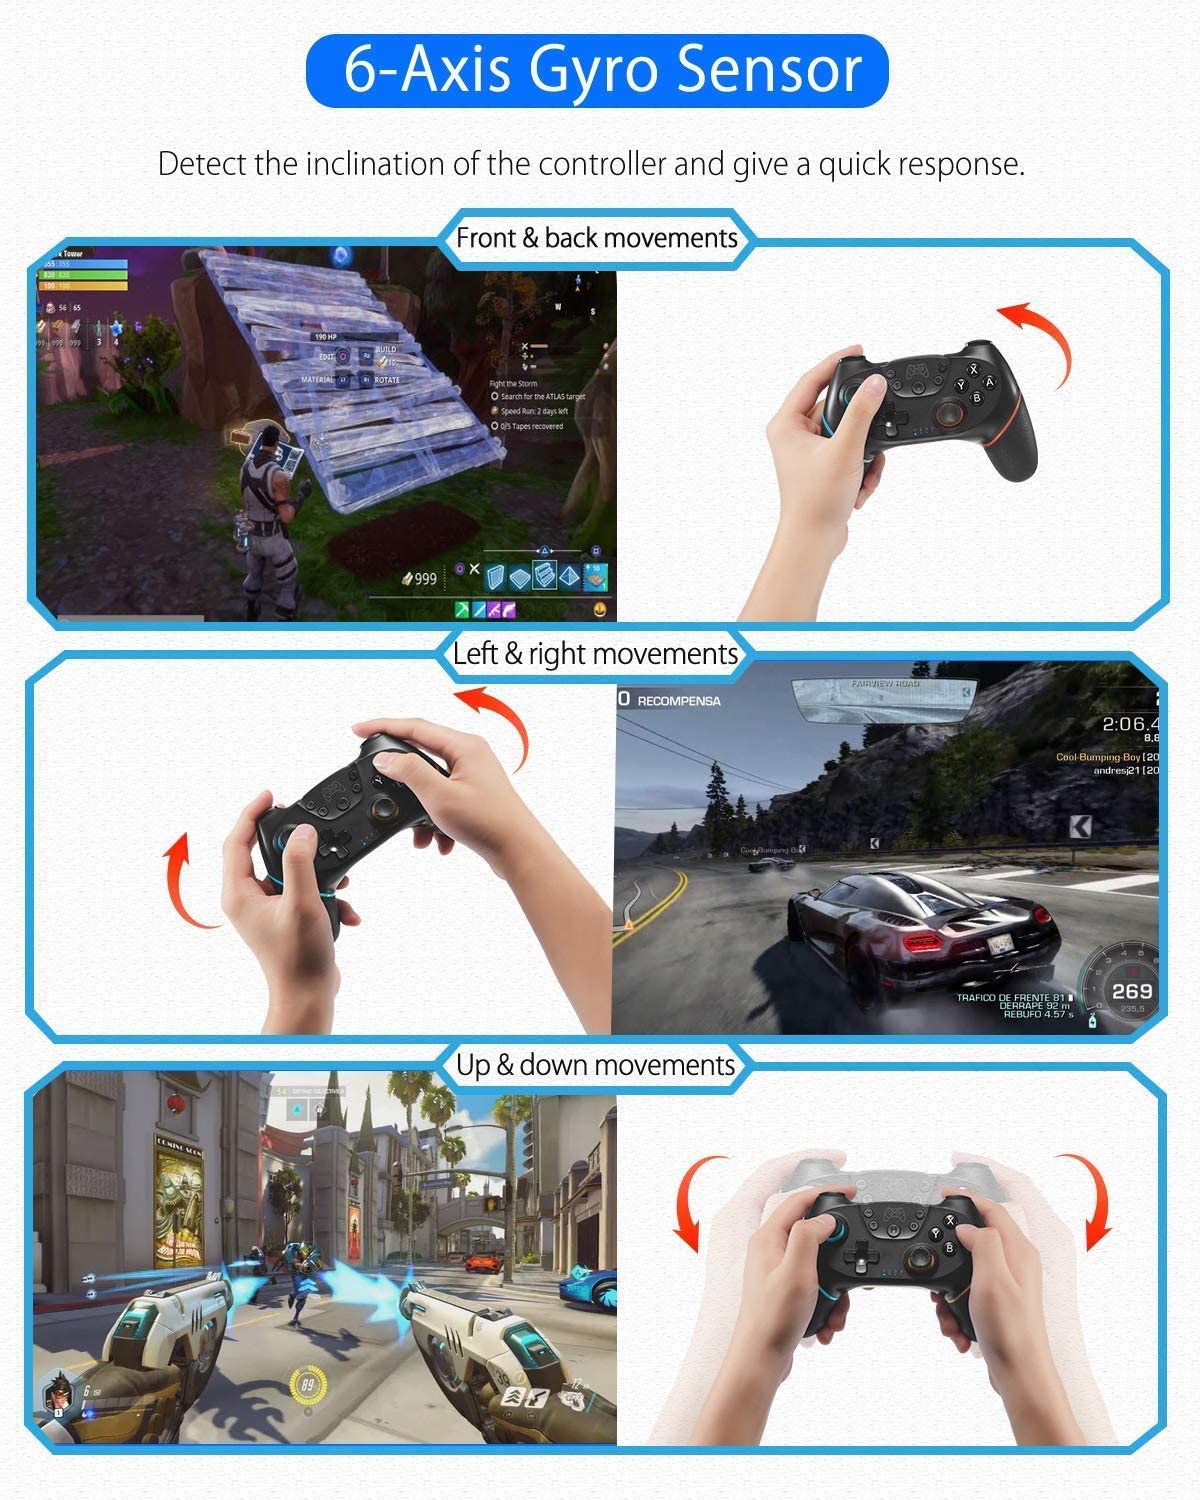 Switch Controller, Wireless Pro Controller for Switch/Switch Lite/Switch OLED, Switch Remote Gamepad with Joystick, Adjustable Turbo Vibration, Ergonomic Non-Slip